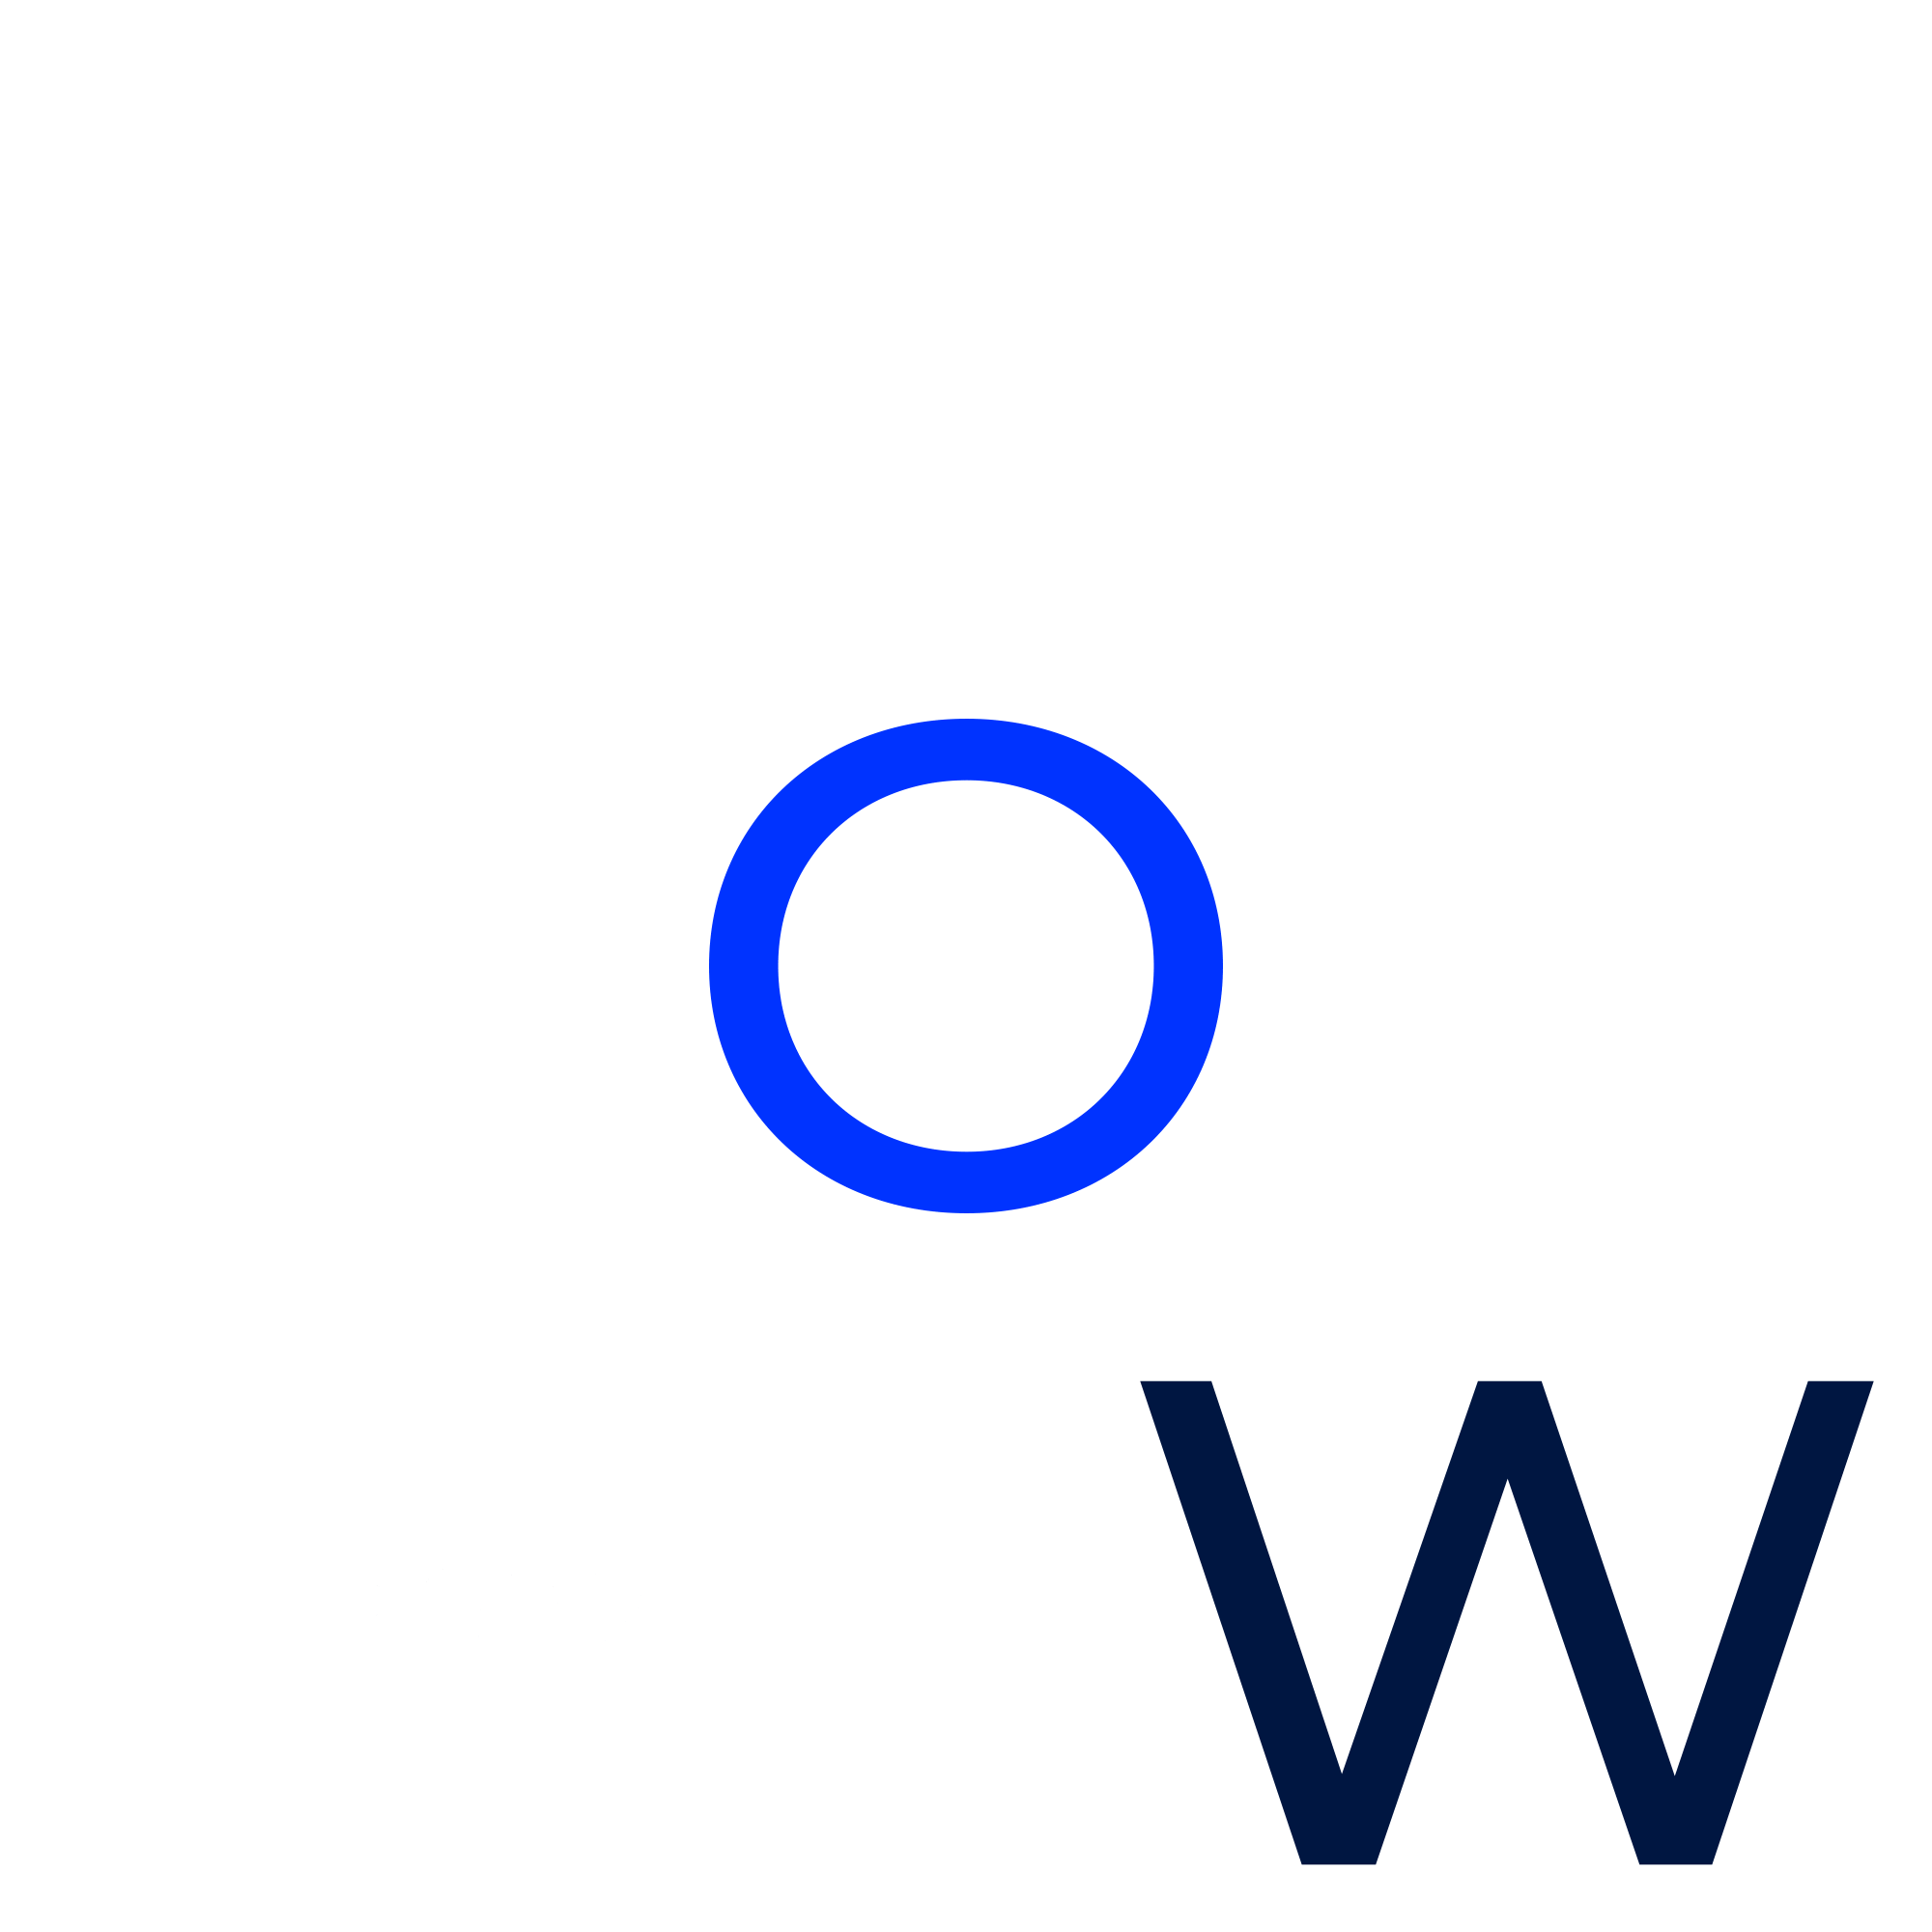 Uow Discovery Day 2022 Sticker by University of Wollongong